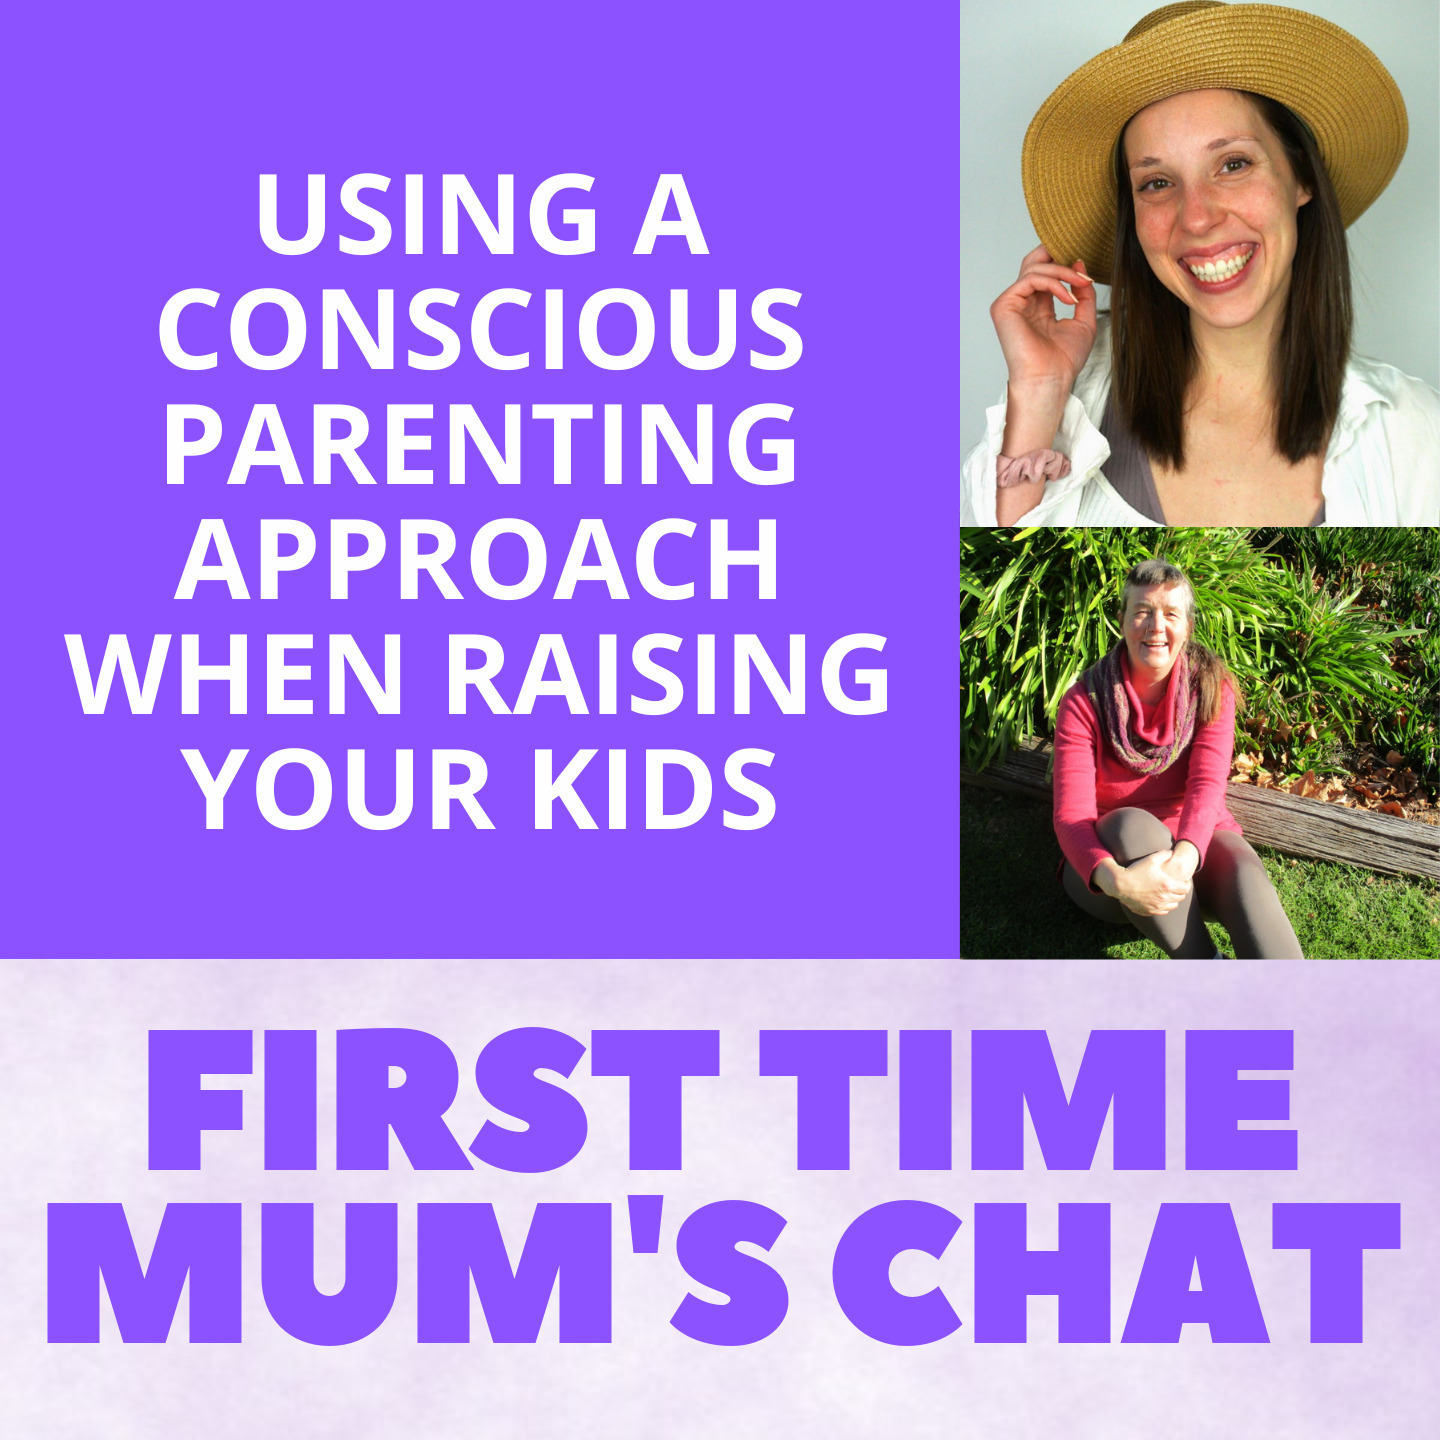 Using a Conscious Parenting Approach When Raising Your Kids